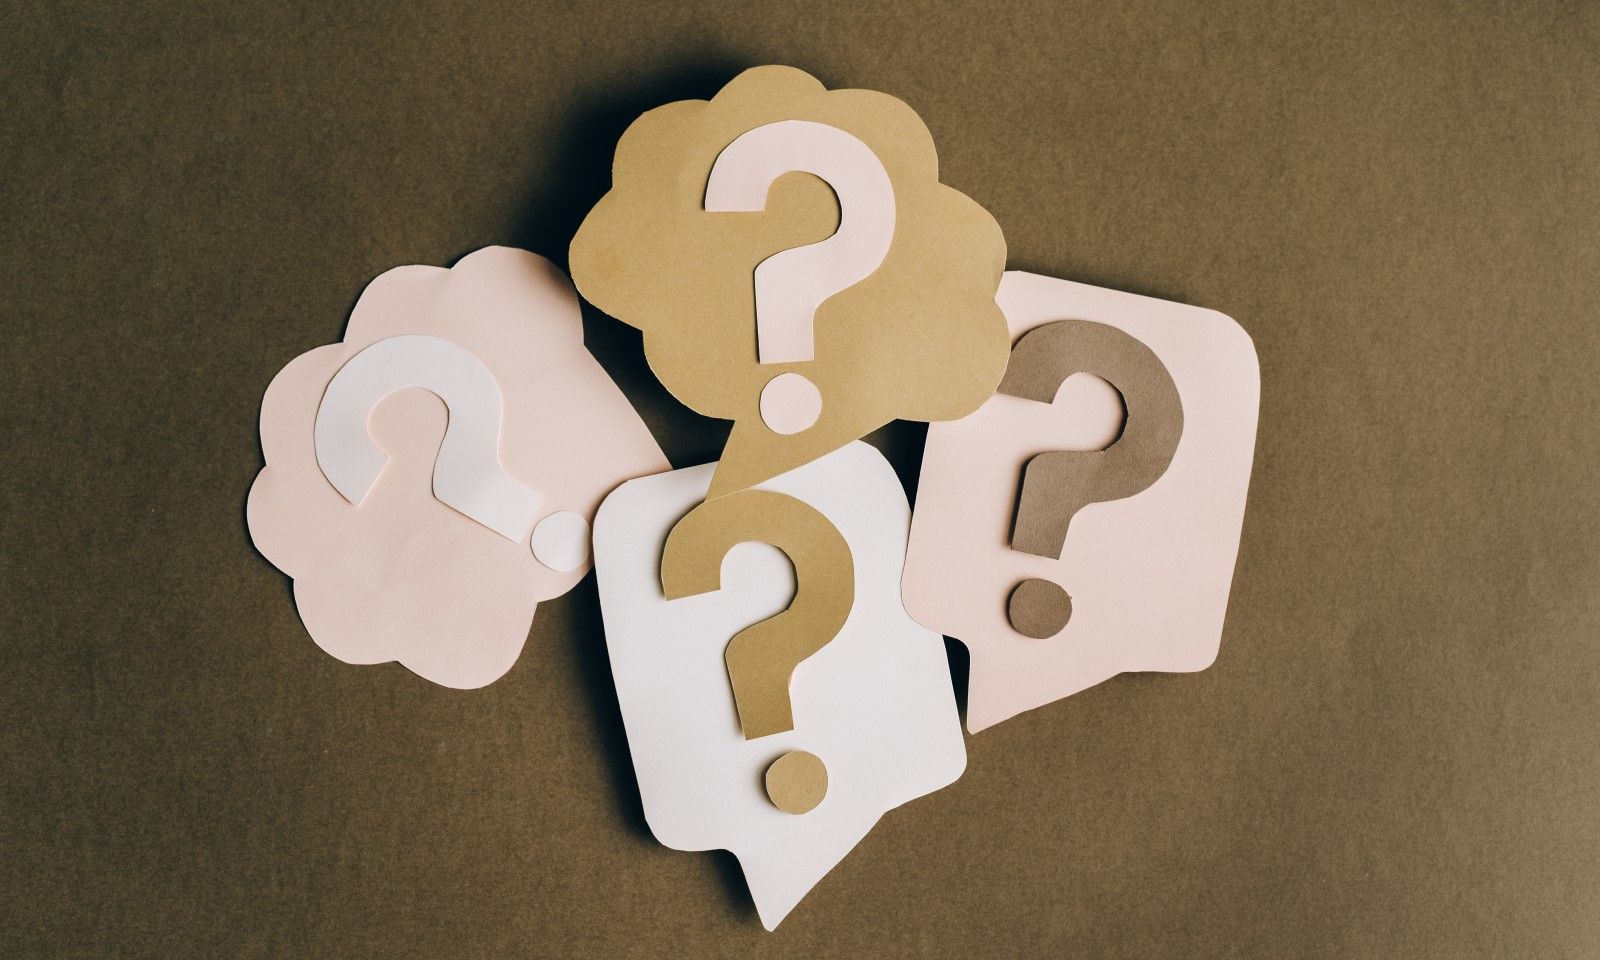 questions trivia cut outs in brown background